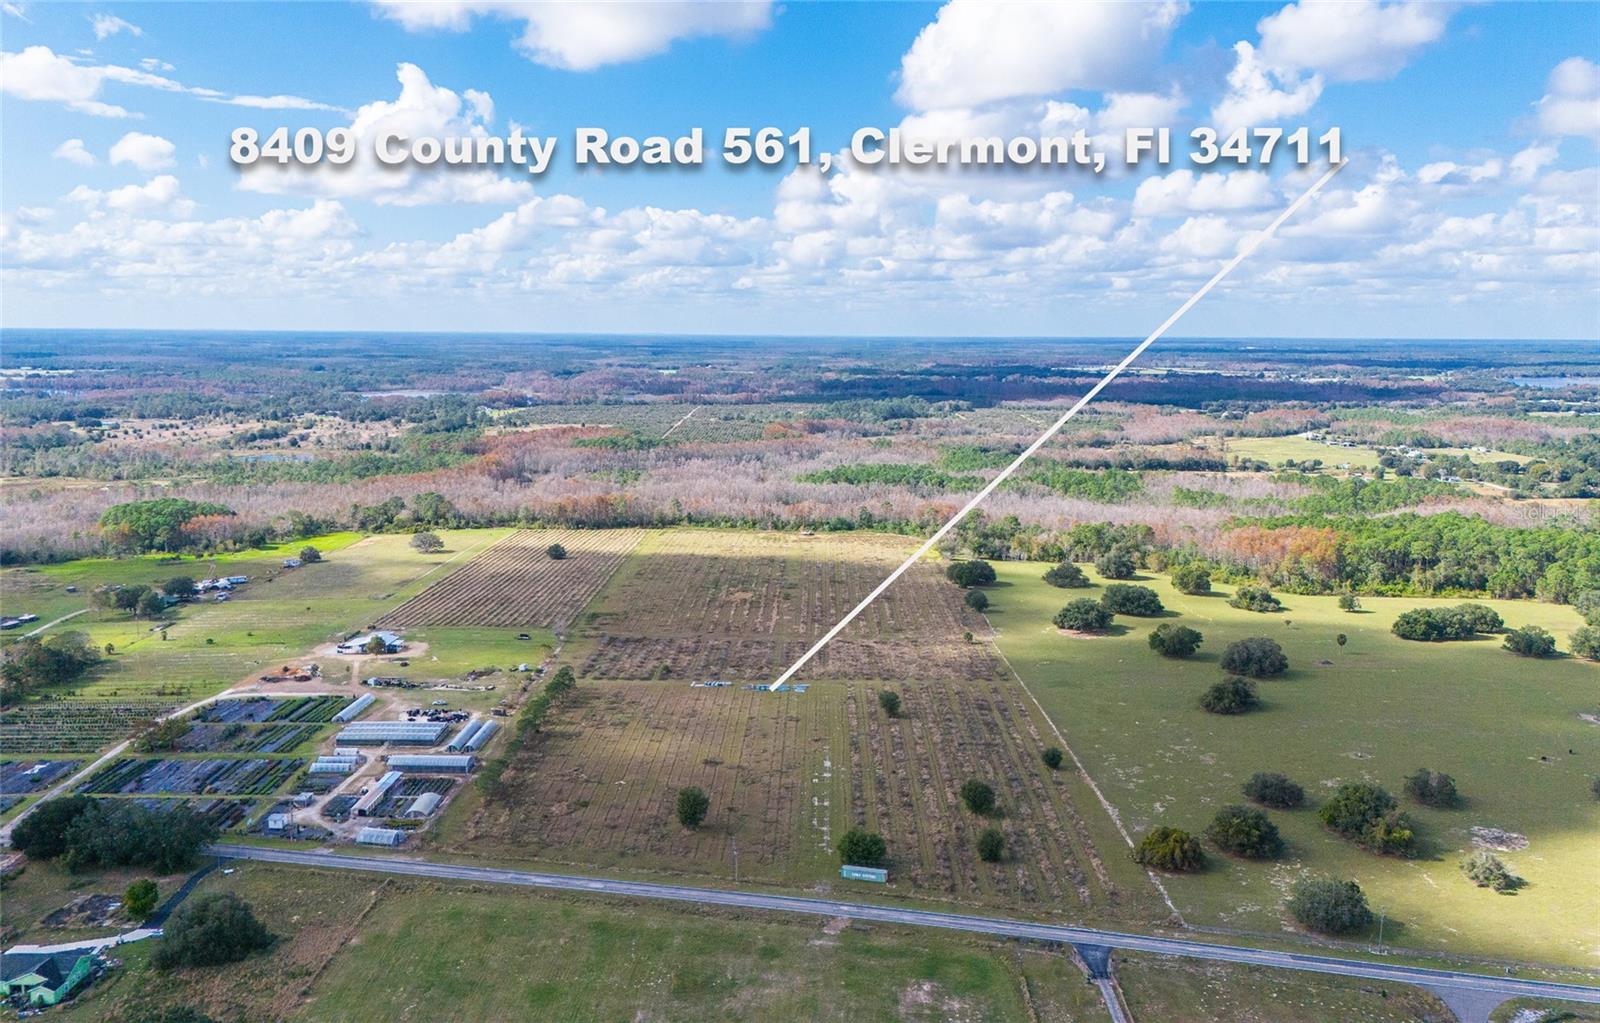 Photo of COUNTY ROAD 561, CLERMONT, FL 34711